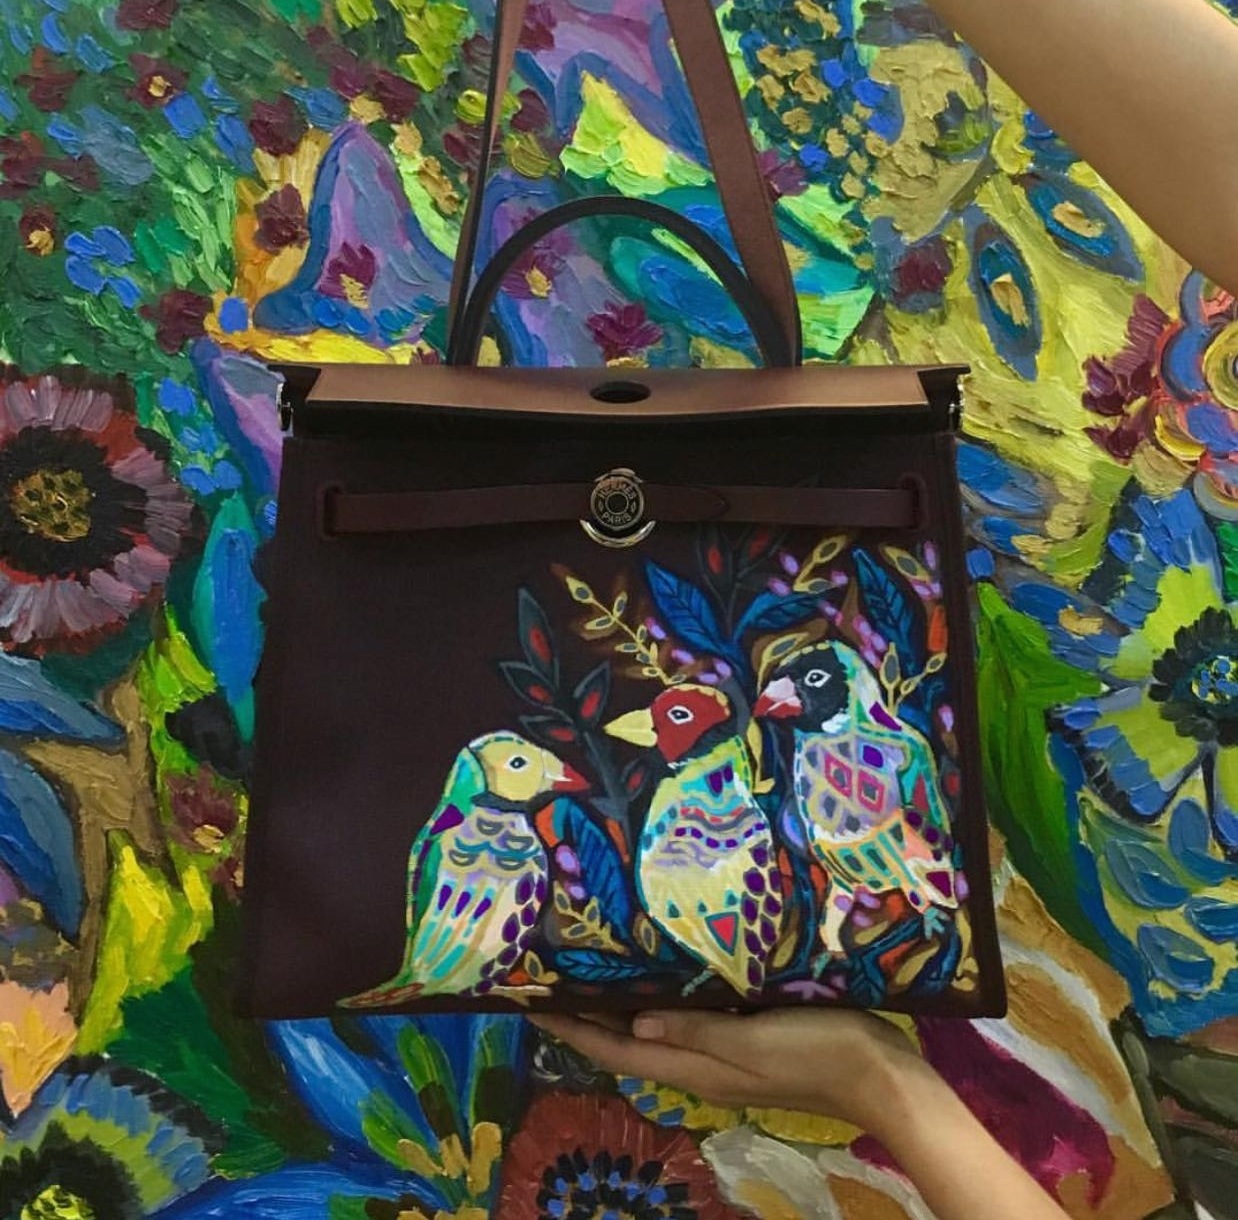 Heart Evangelista paints her LV bag with Filipino culture-inspired art